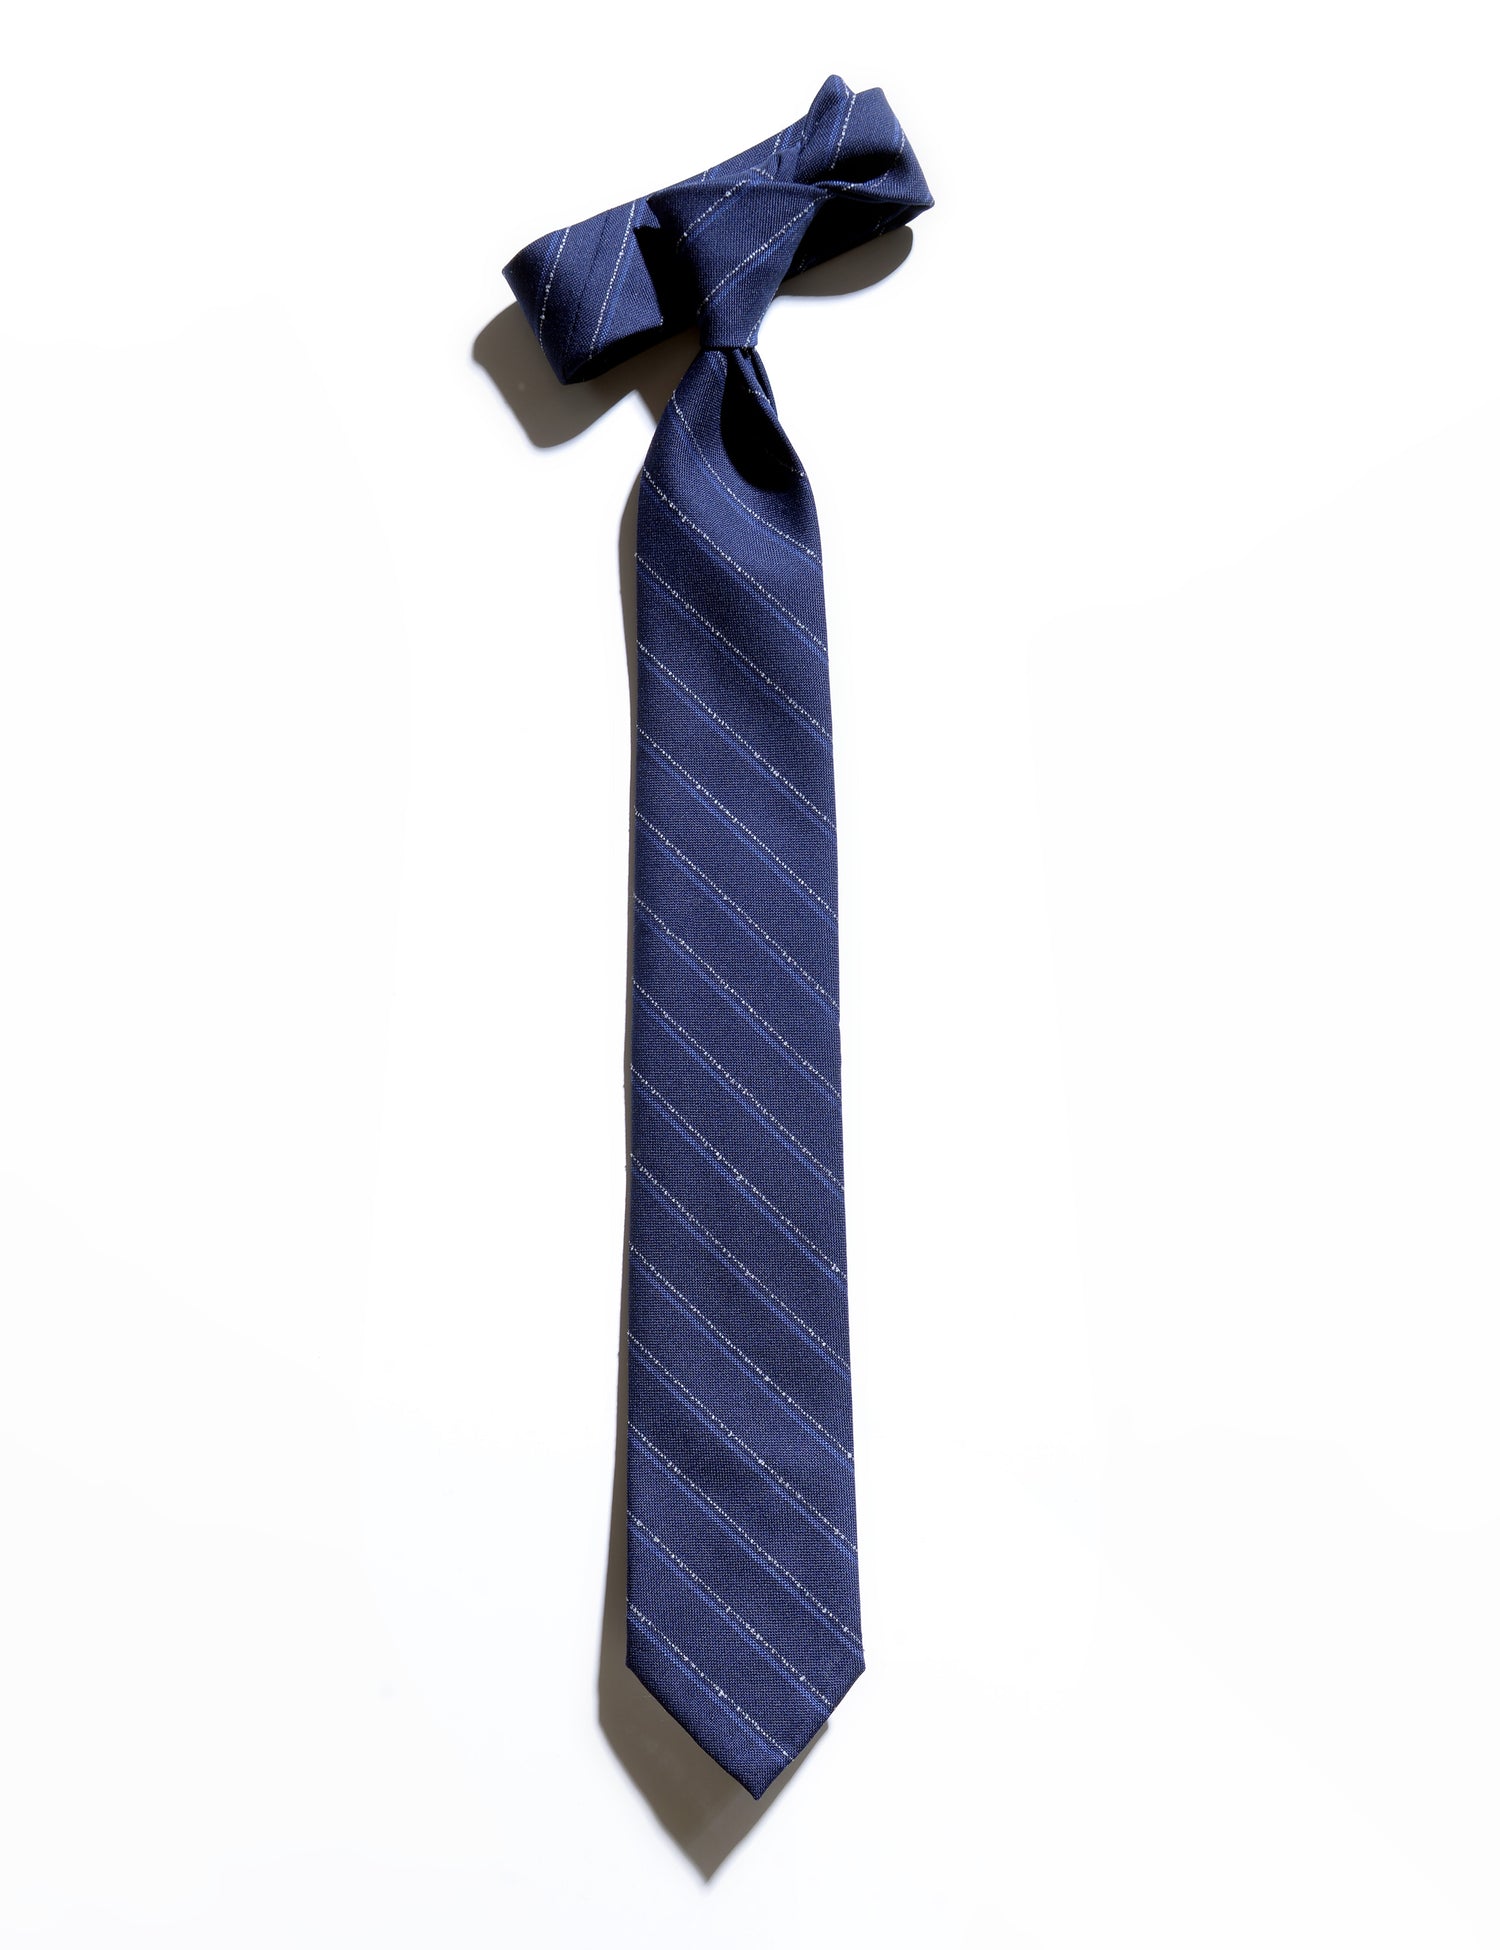 Flat shot of Brooklyn Tailors Untipped Mid-gray with Blue and White Chalkstripe Tie